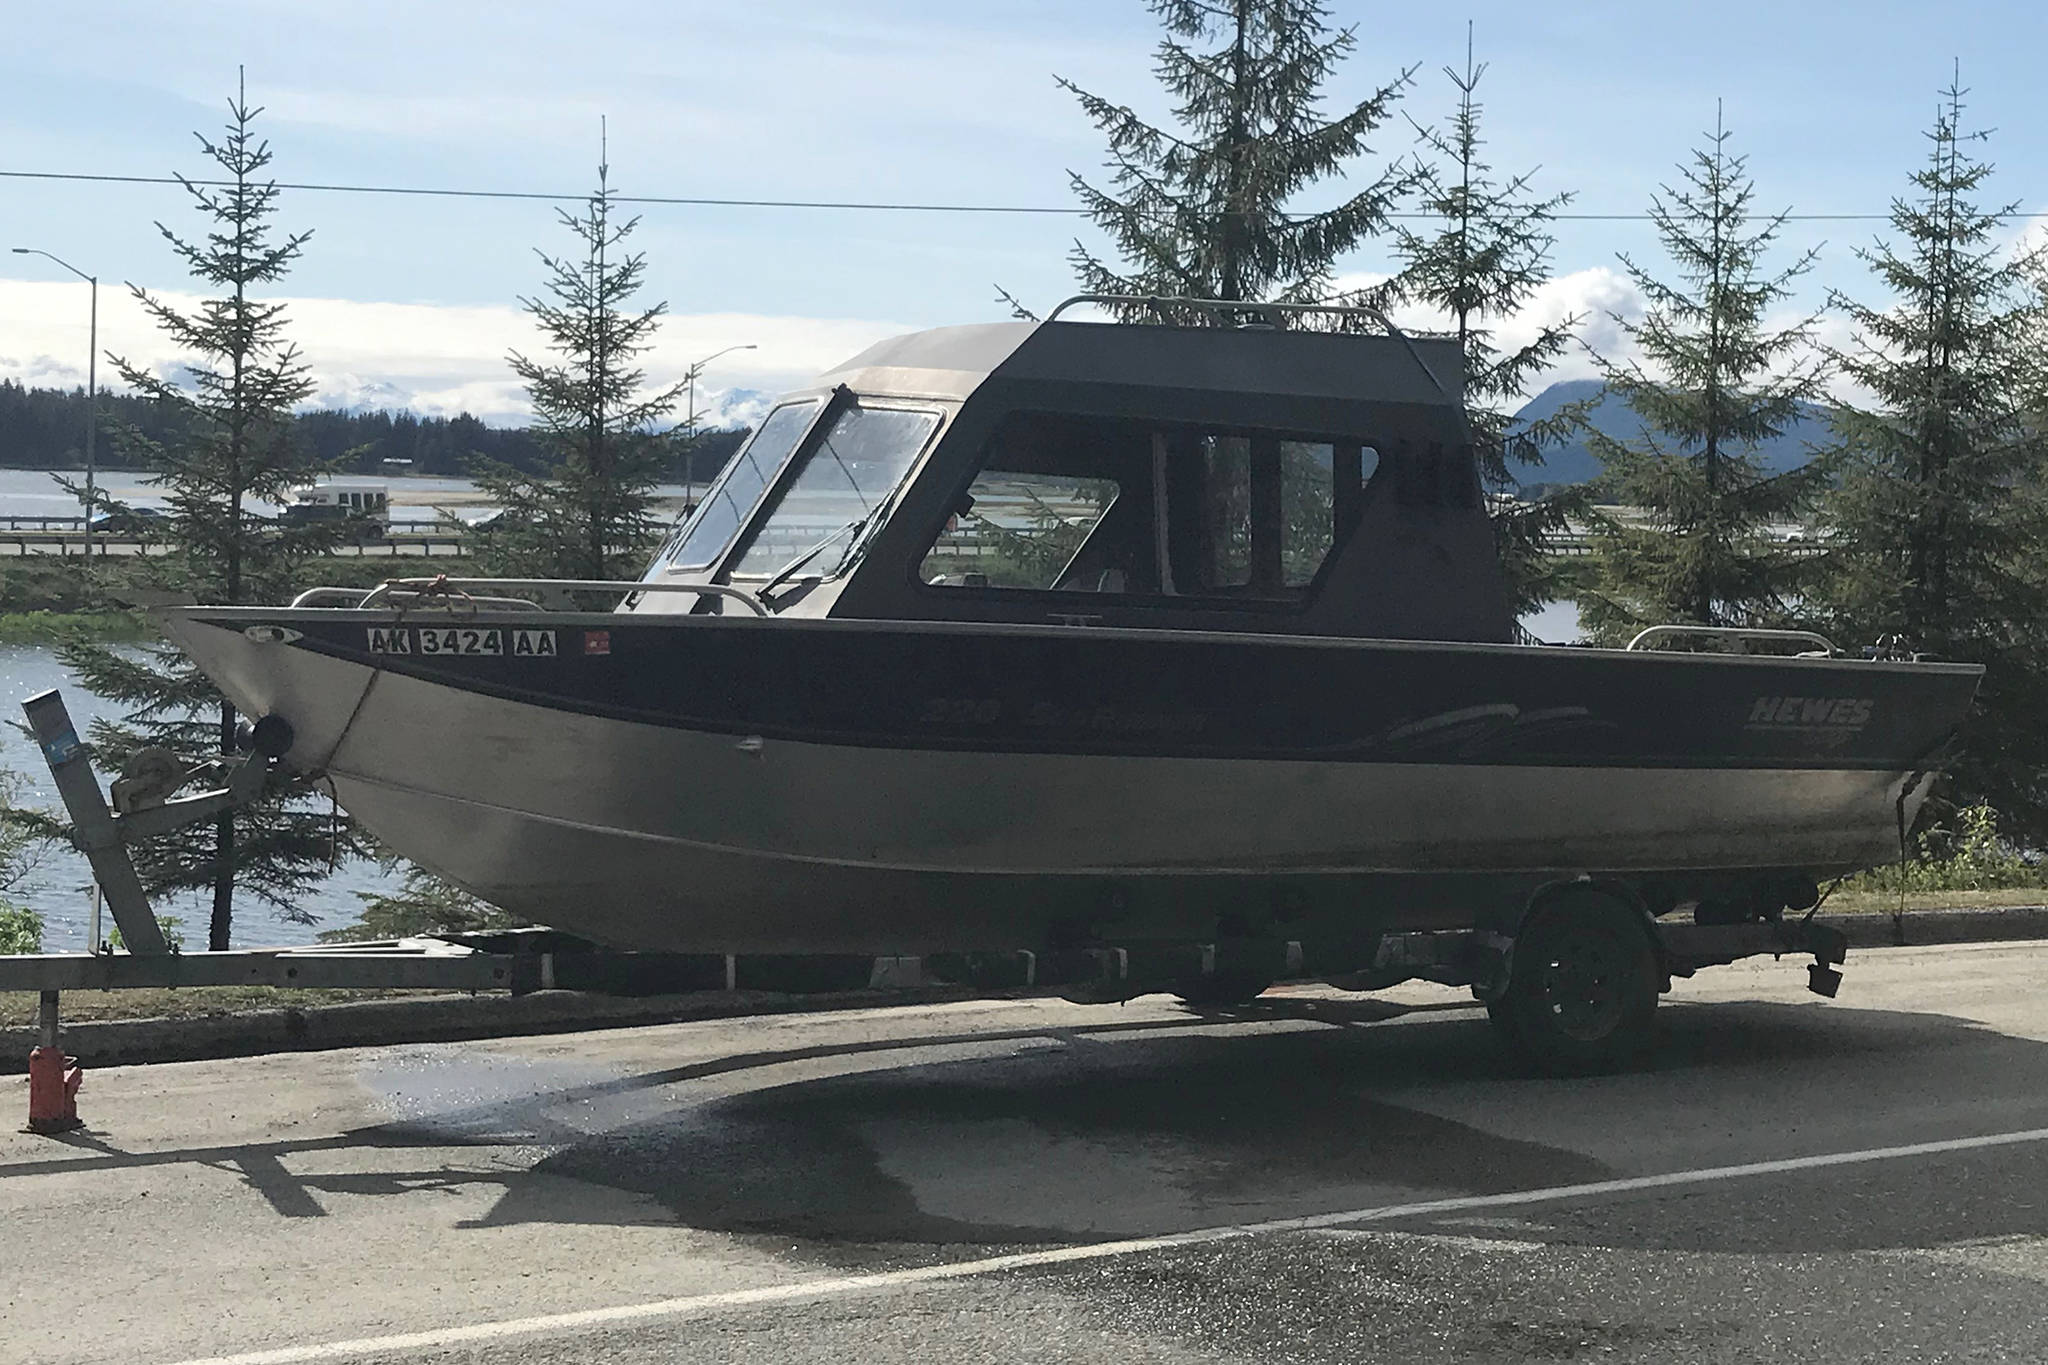 Eric Torgerson’s boat is pictured on Glacier Highway on Thursday, May 9, 2019. The boat was stolen this week, and the investigation into the theft is ongoing. (Alex McCarthy | Juneau Empire)